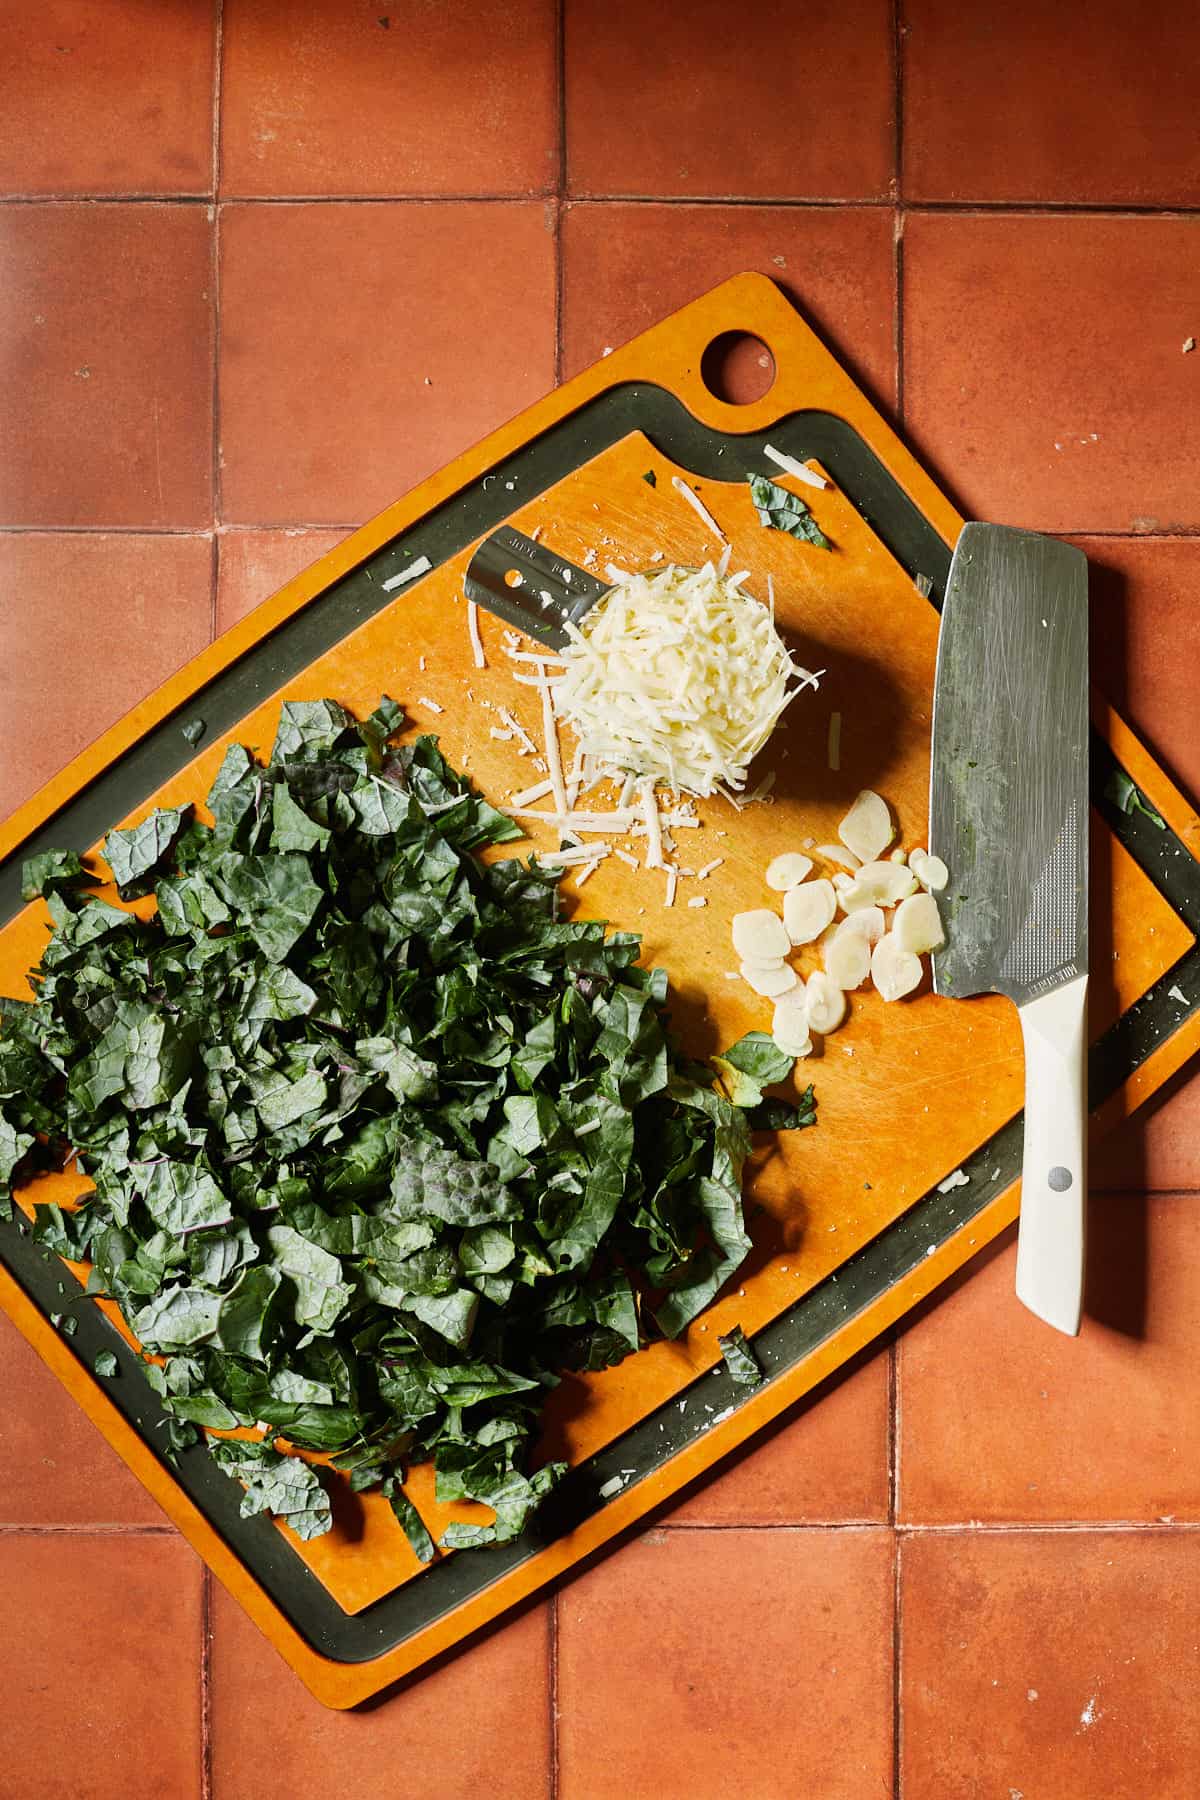 kale, garlic and cheese being prepped on a cutting board with a knife